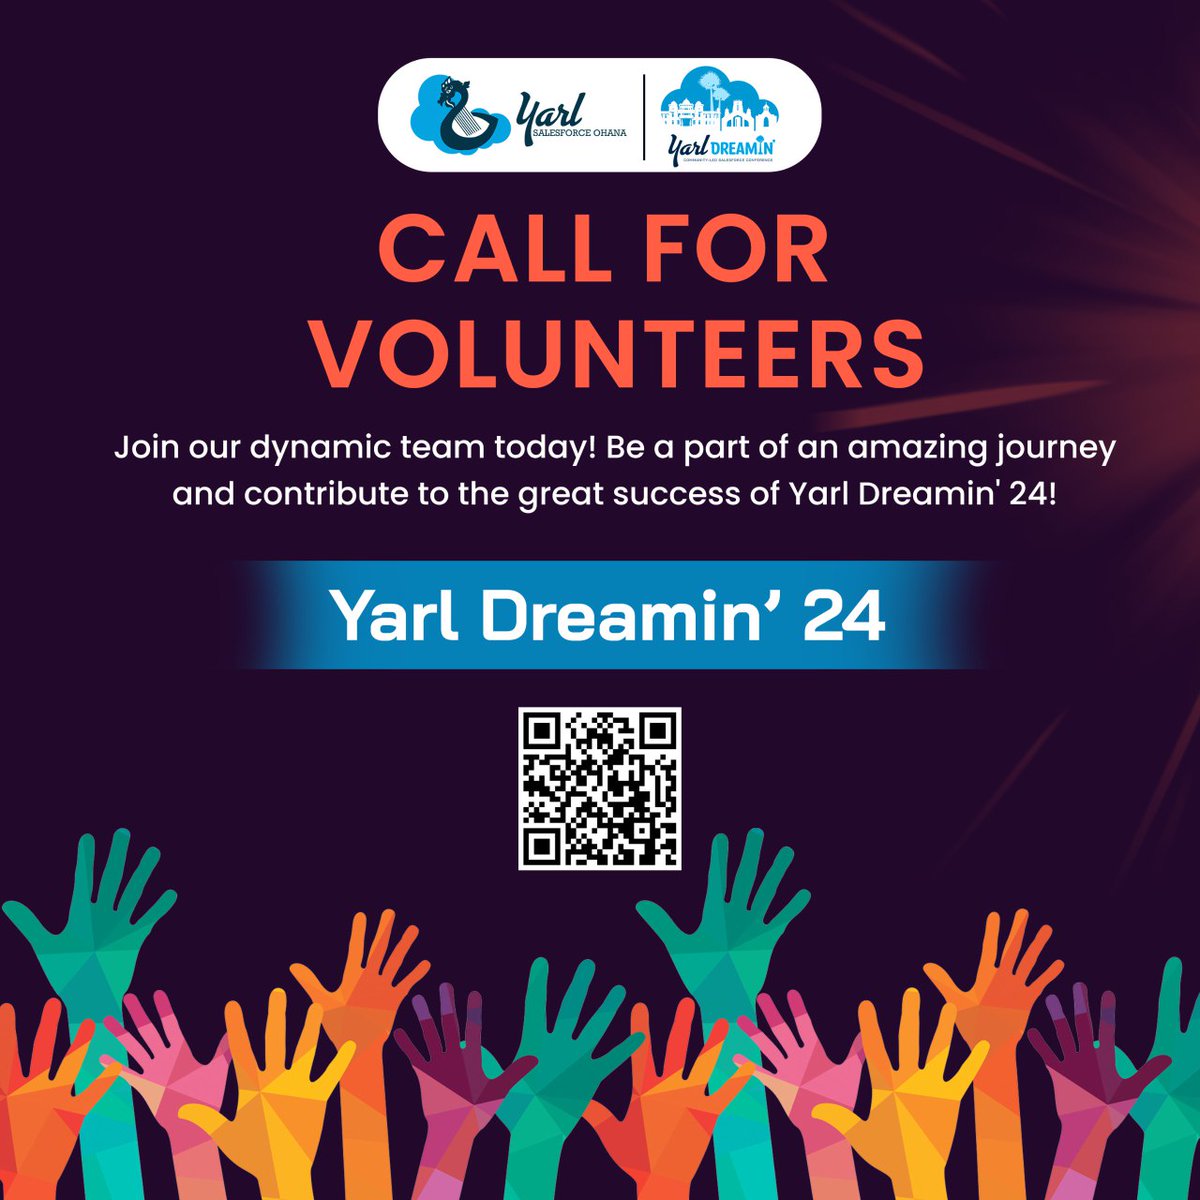 𝑱𝒐𝒊𝒏 𝒐𝒖𝒓 𝒕𝒆𝒂𝒎❗
Volunteer with us at Yarl Dreamin'24 and help make the event unforgettable.
𝐒𝐢𝐠𝐧 𝐮𝐩 𝐡𝐞𝐫𝐞: forms.gle/BGaVUs4sSPX9NA…
𝐀𝐩𝐩𝐥𝐢𝐜𝐚𝐭𝐢𝐨𝐧 𝐃𝐞𝐚𝐝𝐥𝐢𝐧𝐞 - 𝟏𝟓/𝟎𝟒/𝟐𝟎𝟐𝟒
#Salesforce #CloudComputing #YarlSFO #YarlDreamin24 #Conference